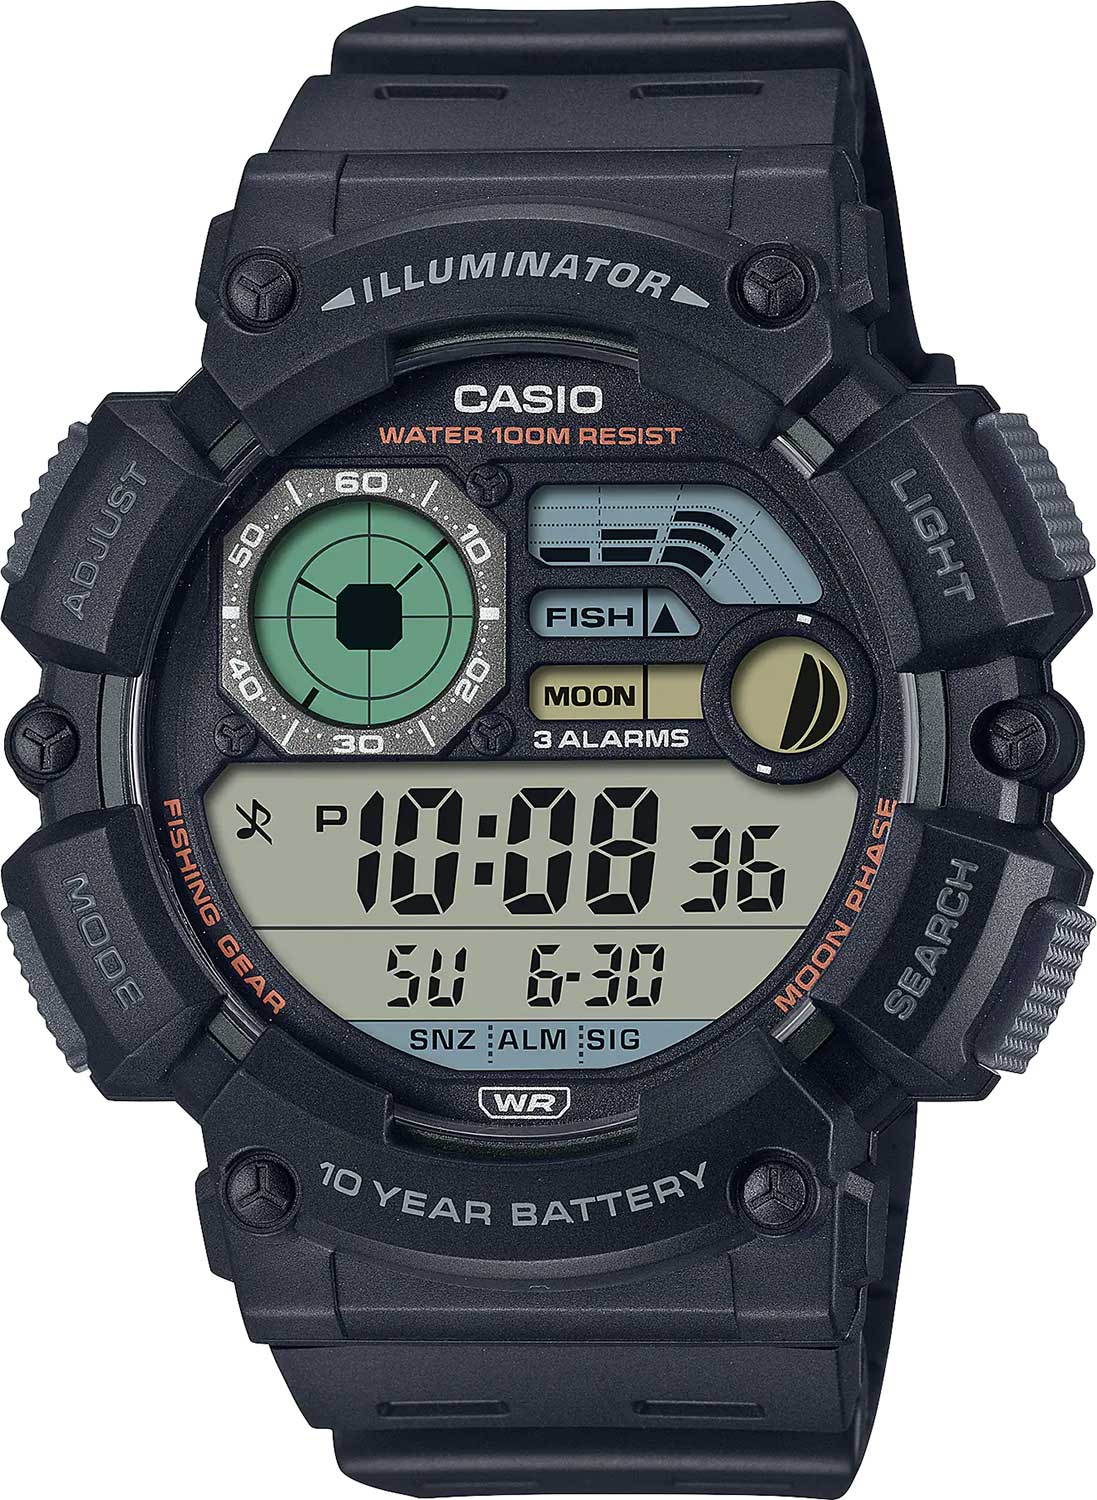    Casio Collection WS-1500H-1A  